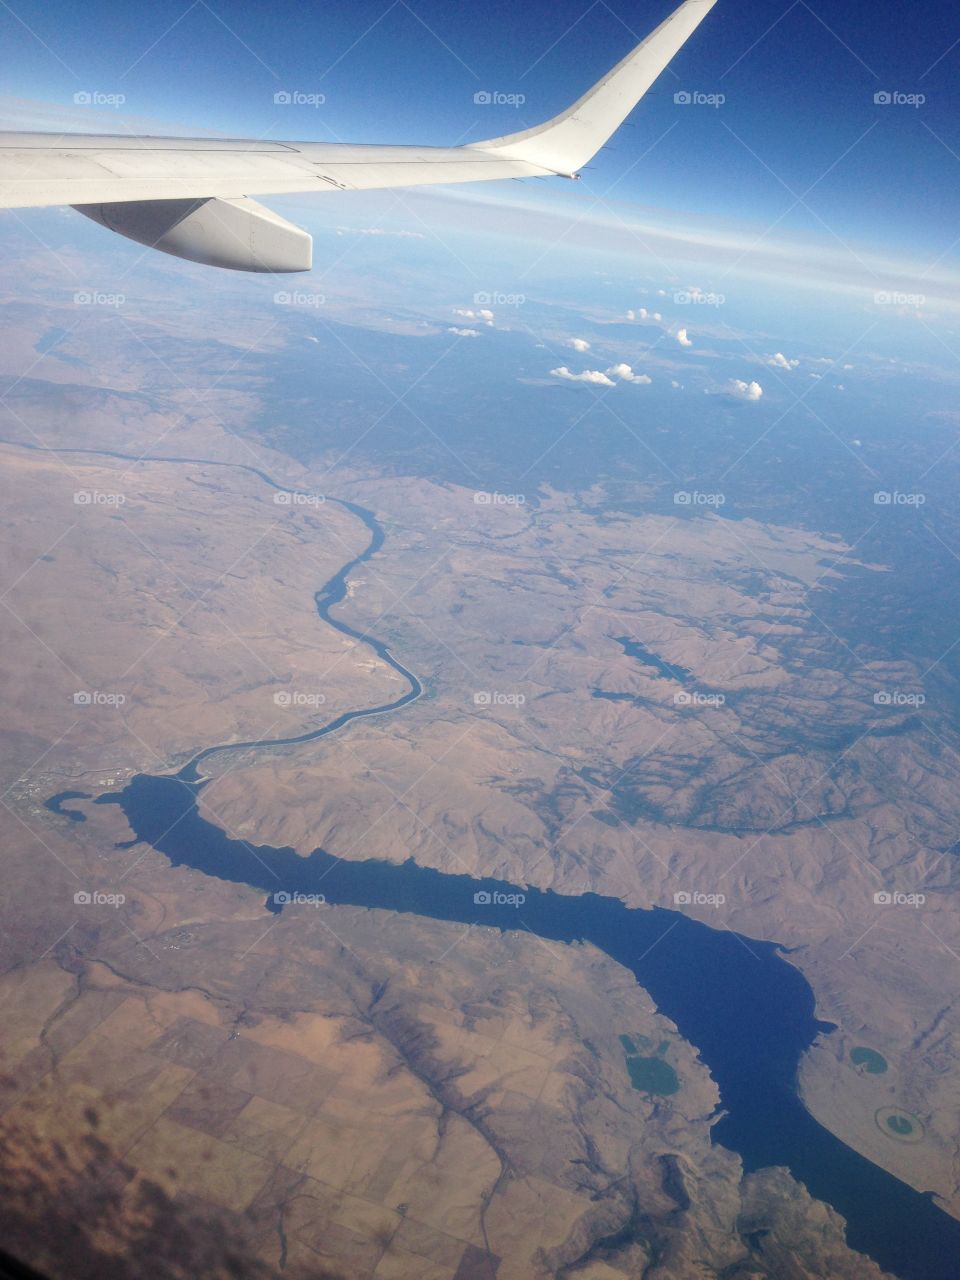 A river from above